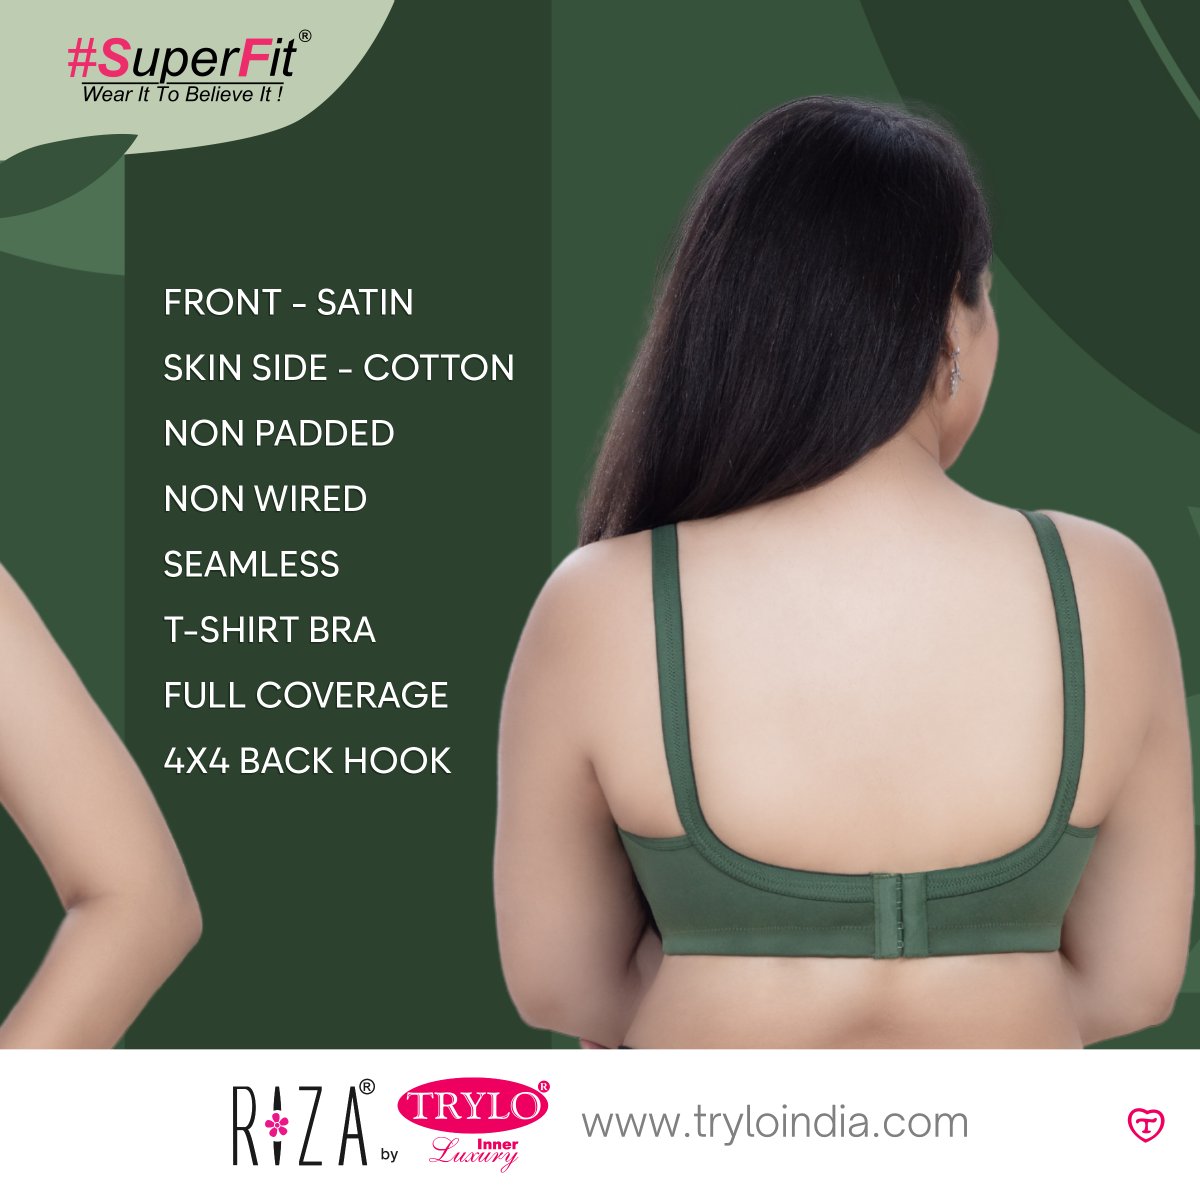 With a unique fabric combination of satin outside and cotton inside, it offers luxury & comfort.

Product shown - Riza Superfit
 
 #TryloIndia #TryloIntimates #RizaIntimates #RizabyTrylo #Seamlessbra #LuxuryComfortSupport #RizaSuperfit